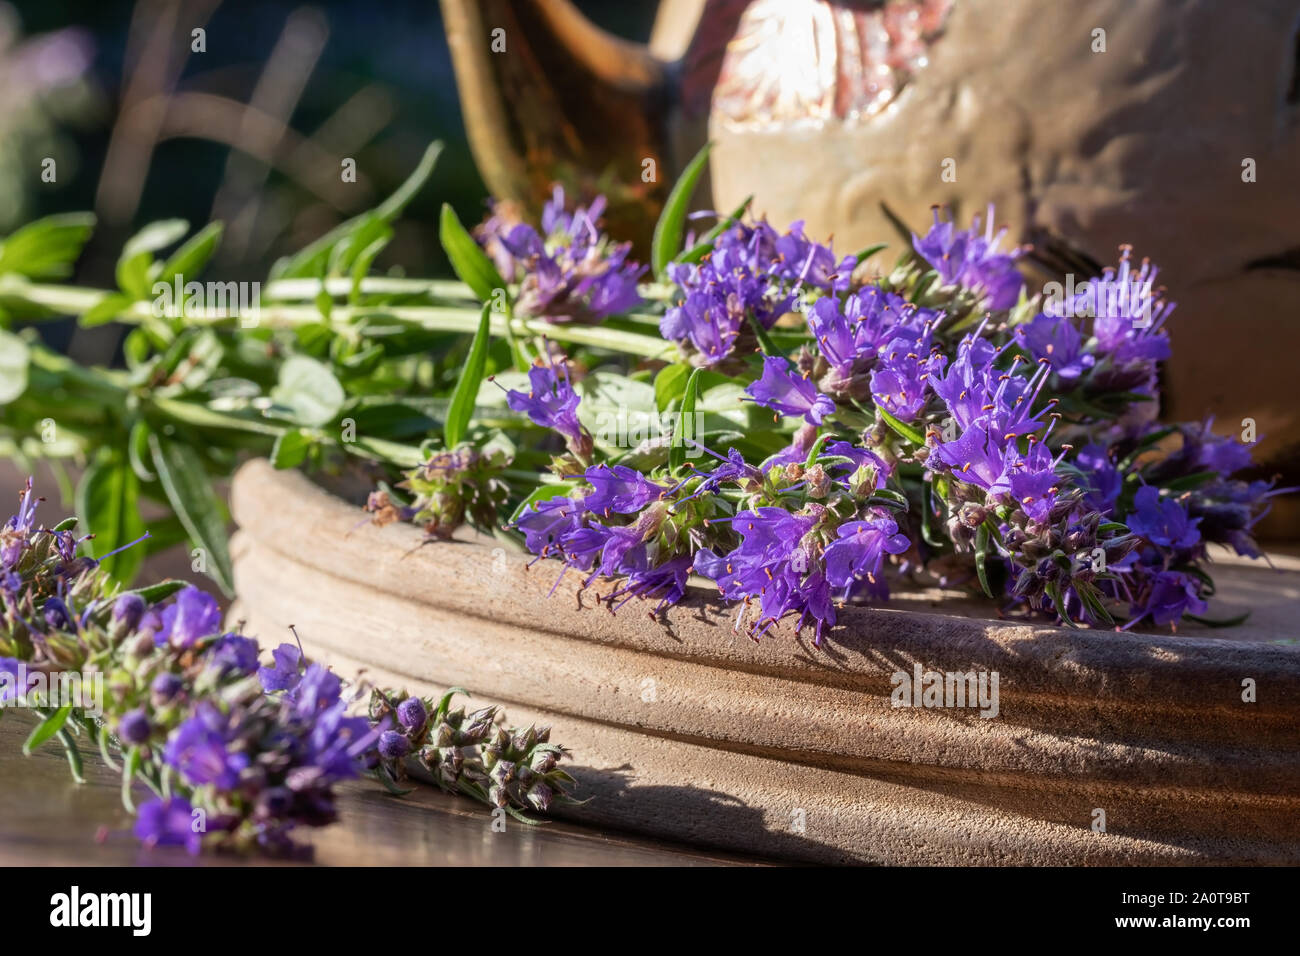 Blooming hyssop twigs on a table, with a teapot in the background Stock Photo